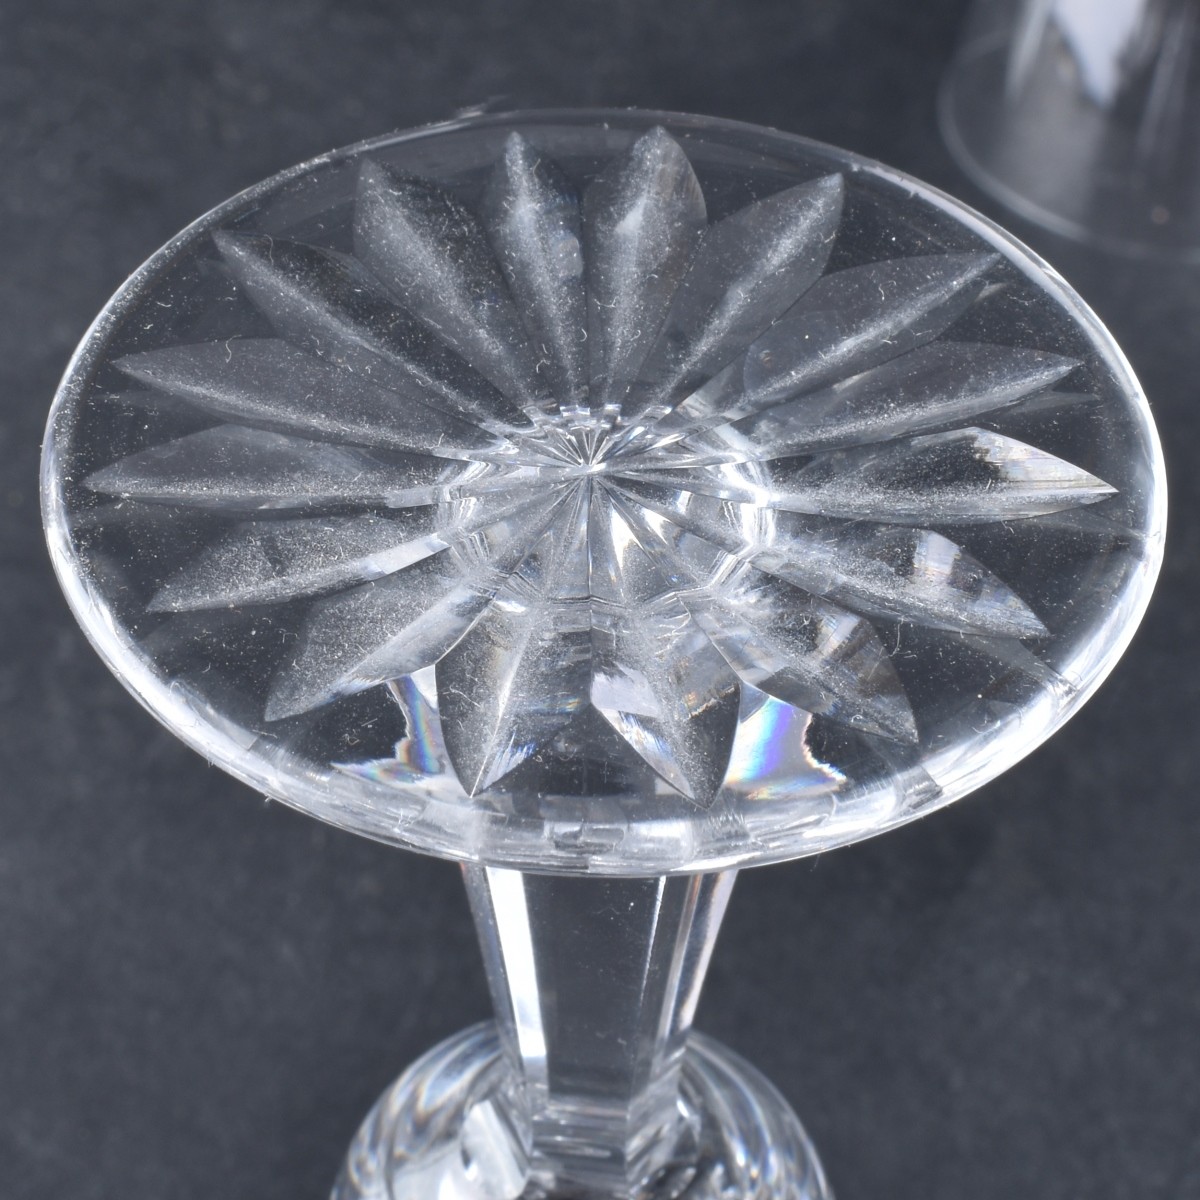 Fourteen (14) Waterford Crystal Glasses